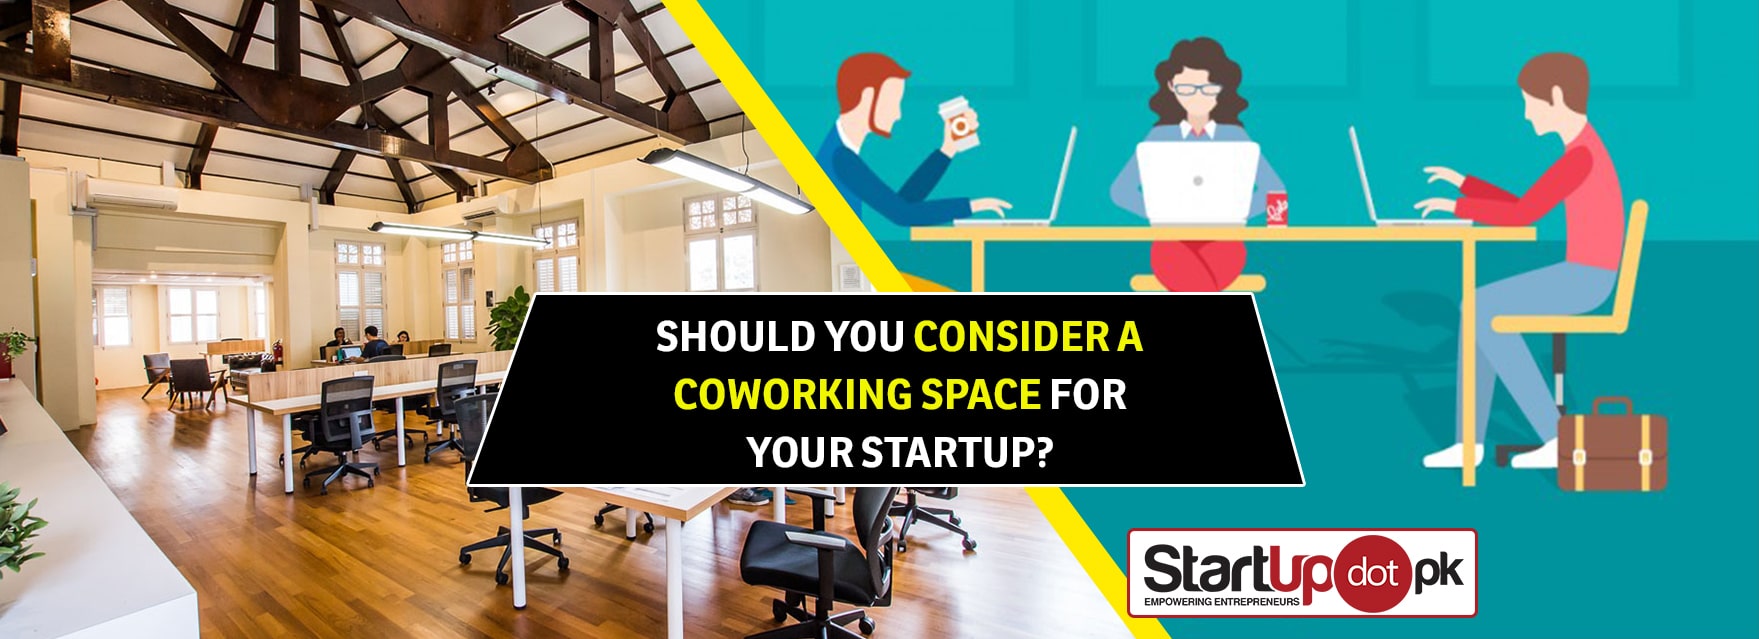 Should you consider a co-working space for your startup?